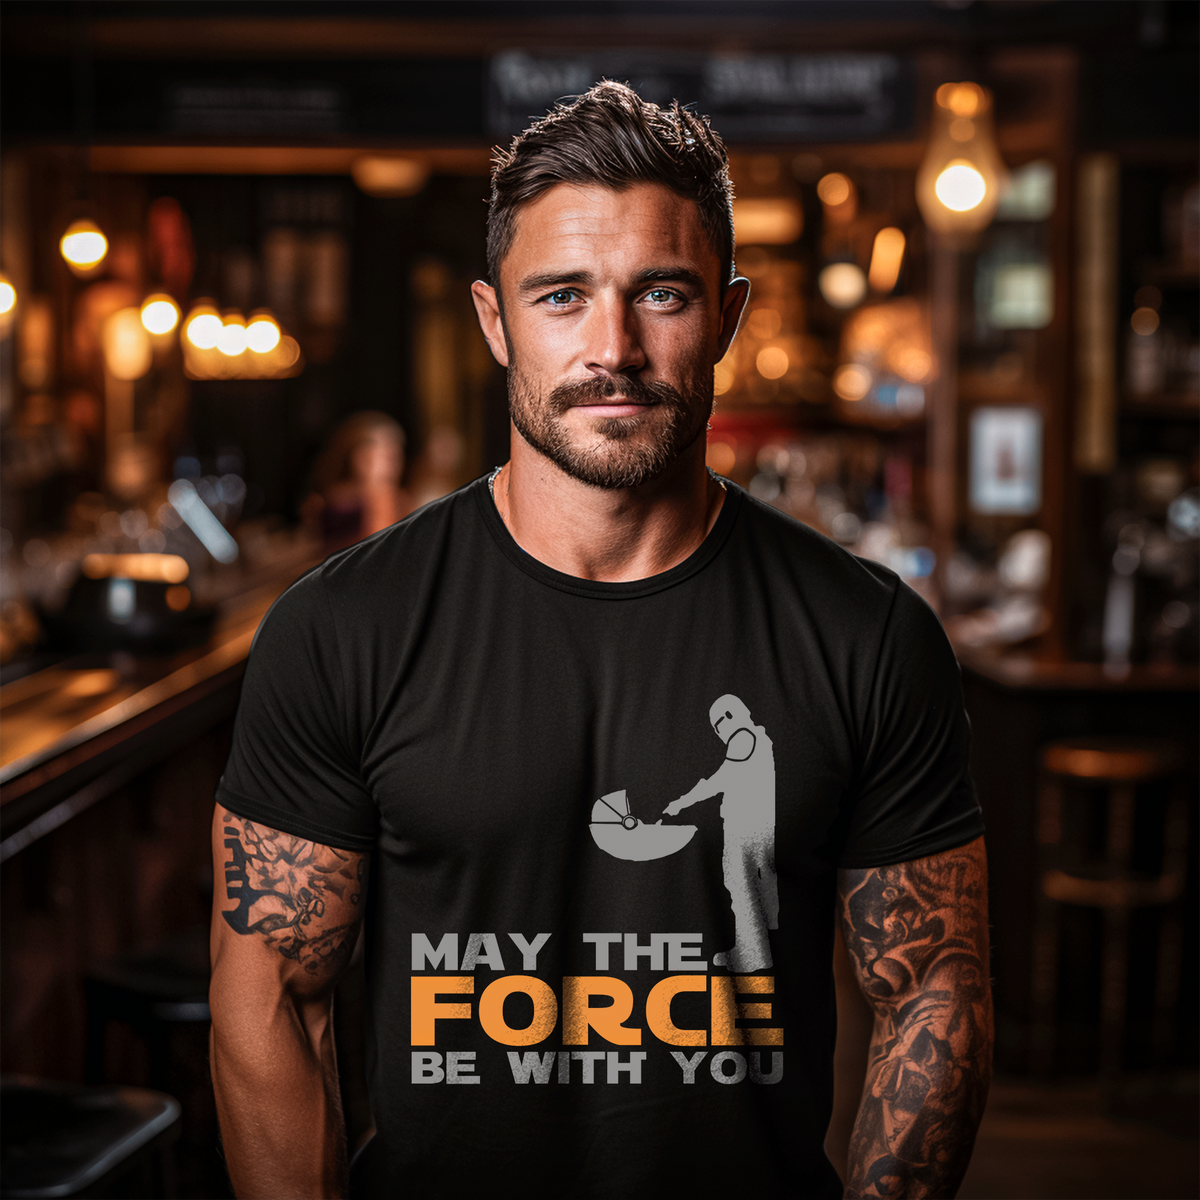 Nome do produto: Camiseta - May The Force Be With You